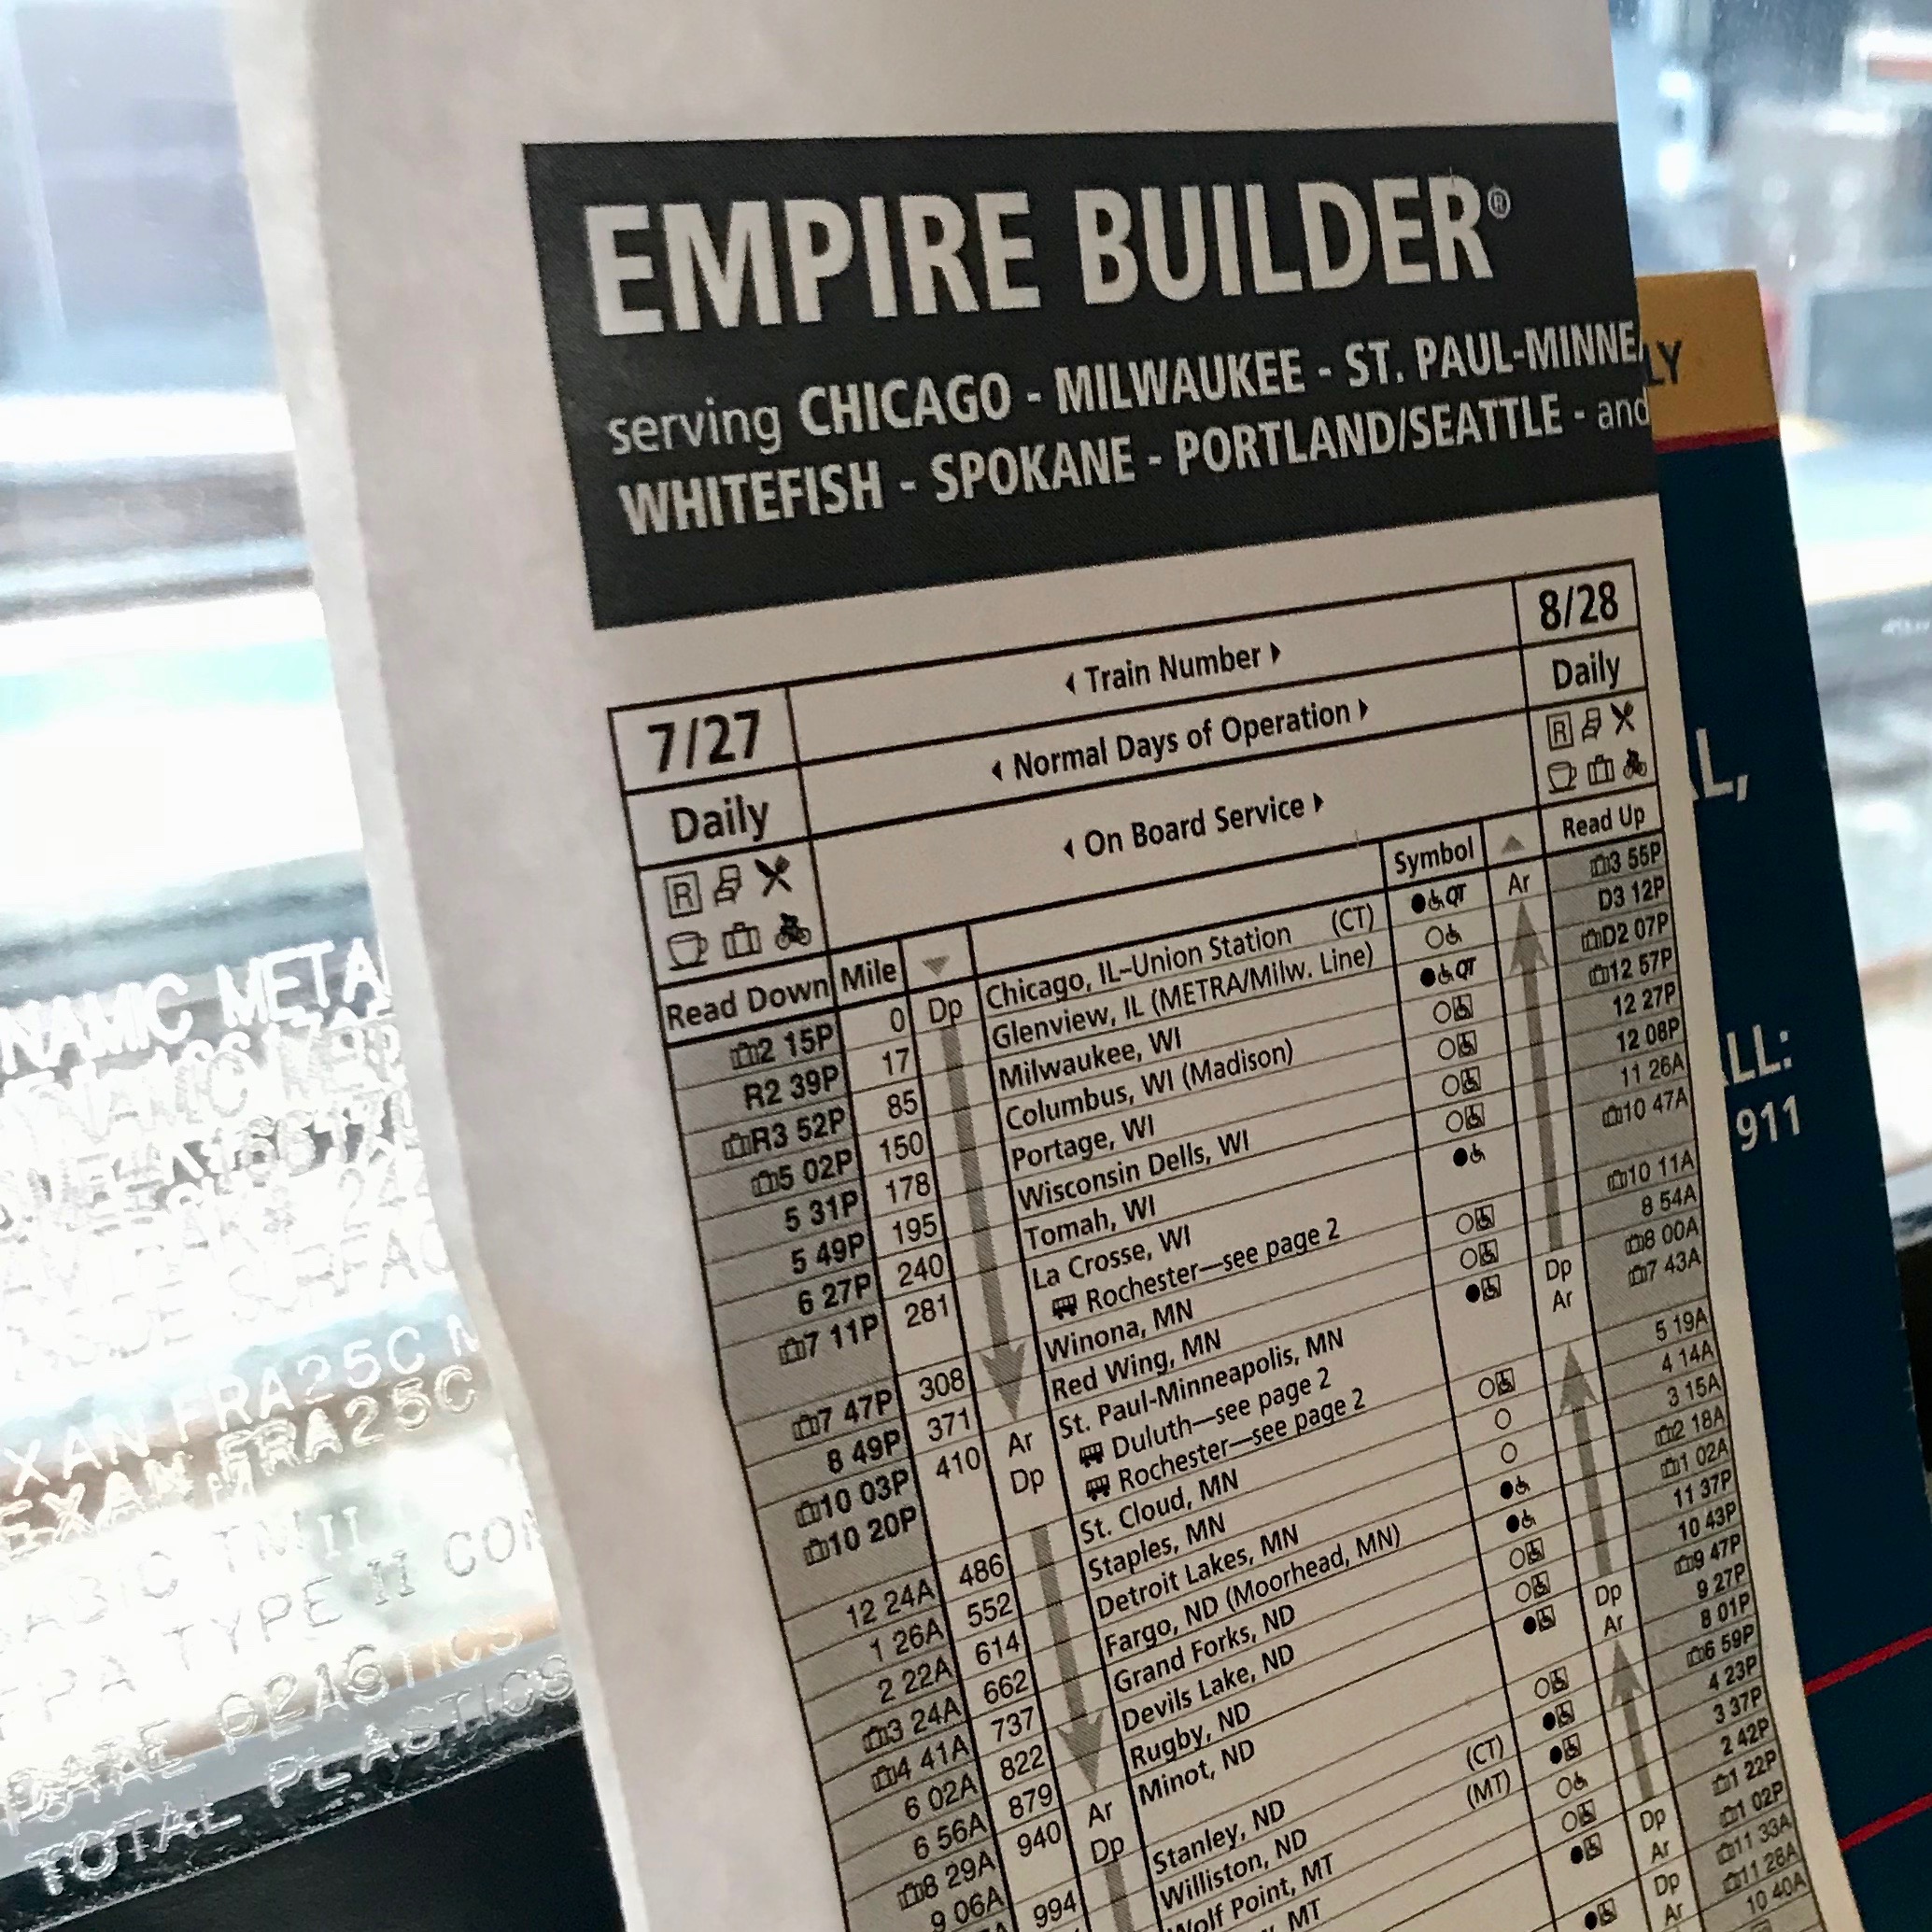 The train attendant provided the official Amtrak timetable for all the stops on the Empire Builder, between Seattle and Chicago.